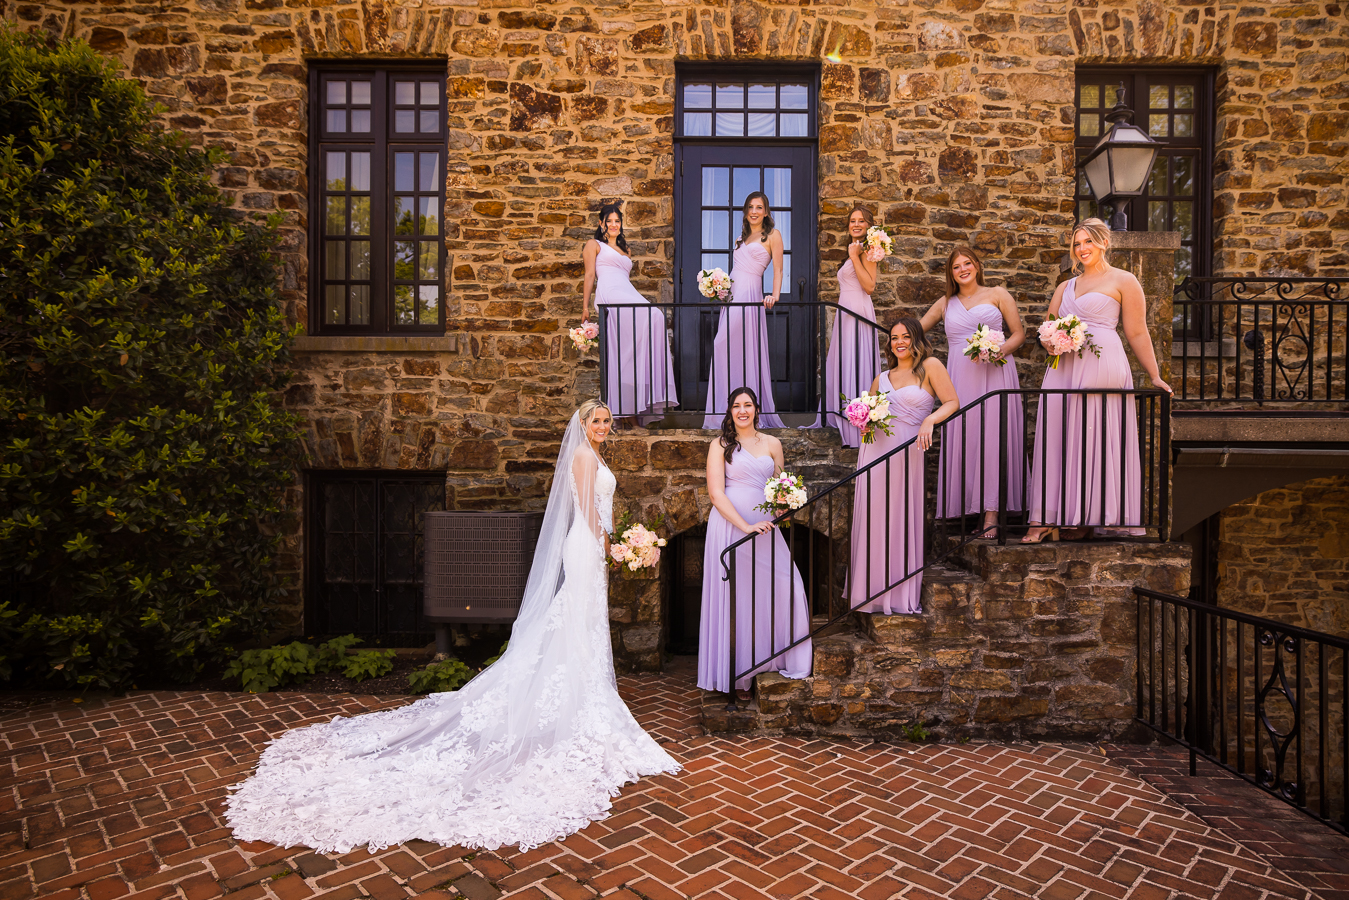 creative wedding photograper, lisa rhinehart, captures this unique image of the bride with her bridesmaids standing on the stairway during their bridal party portraits outside of the country club